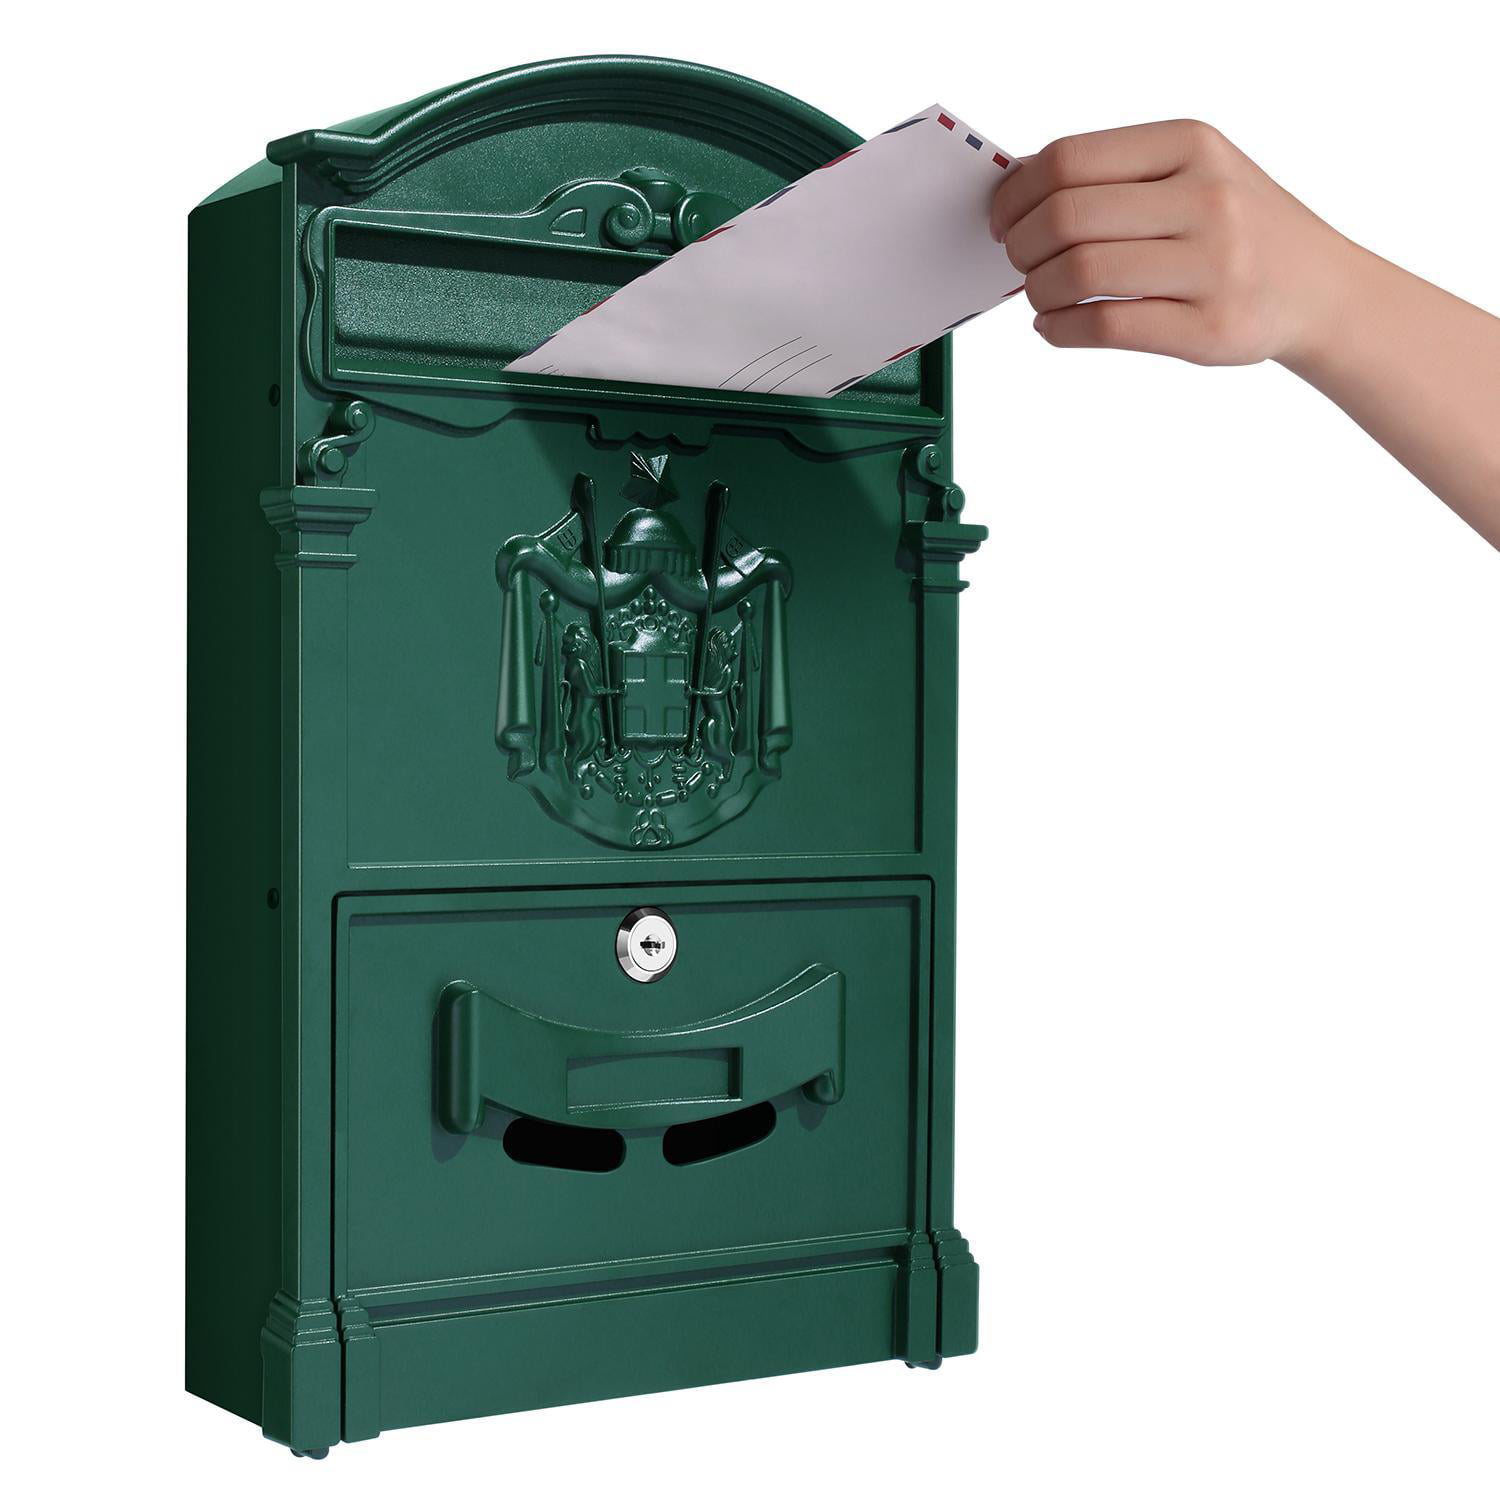 Wall Mounted Letterbox Mailbox Postbox Parcel Drop Box Outdoor Outside Large Front Door Waterproof Lockable Safe Secure Mail Post Letter Box-Black